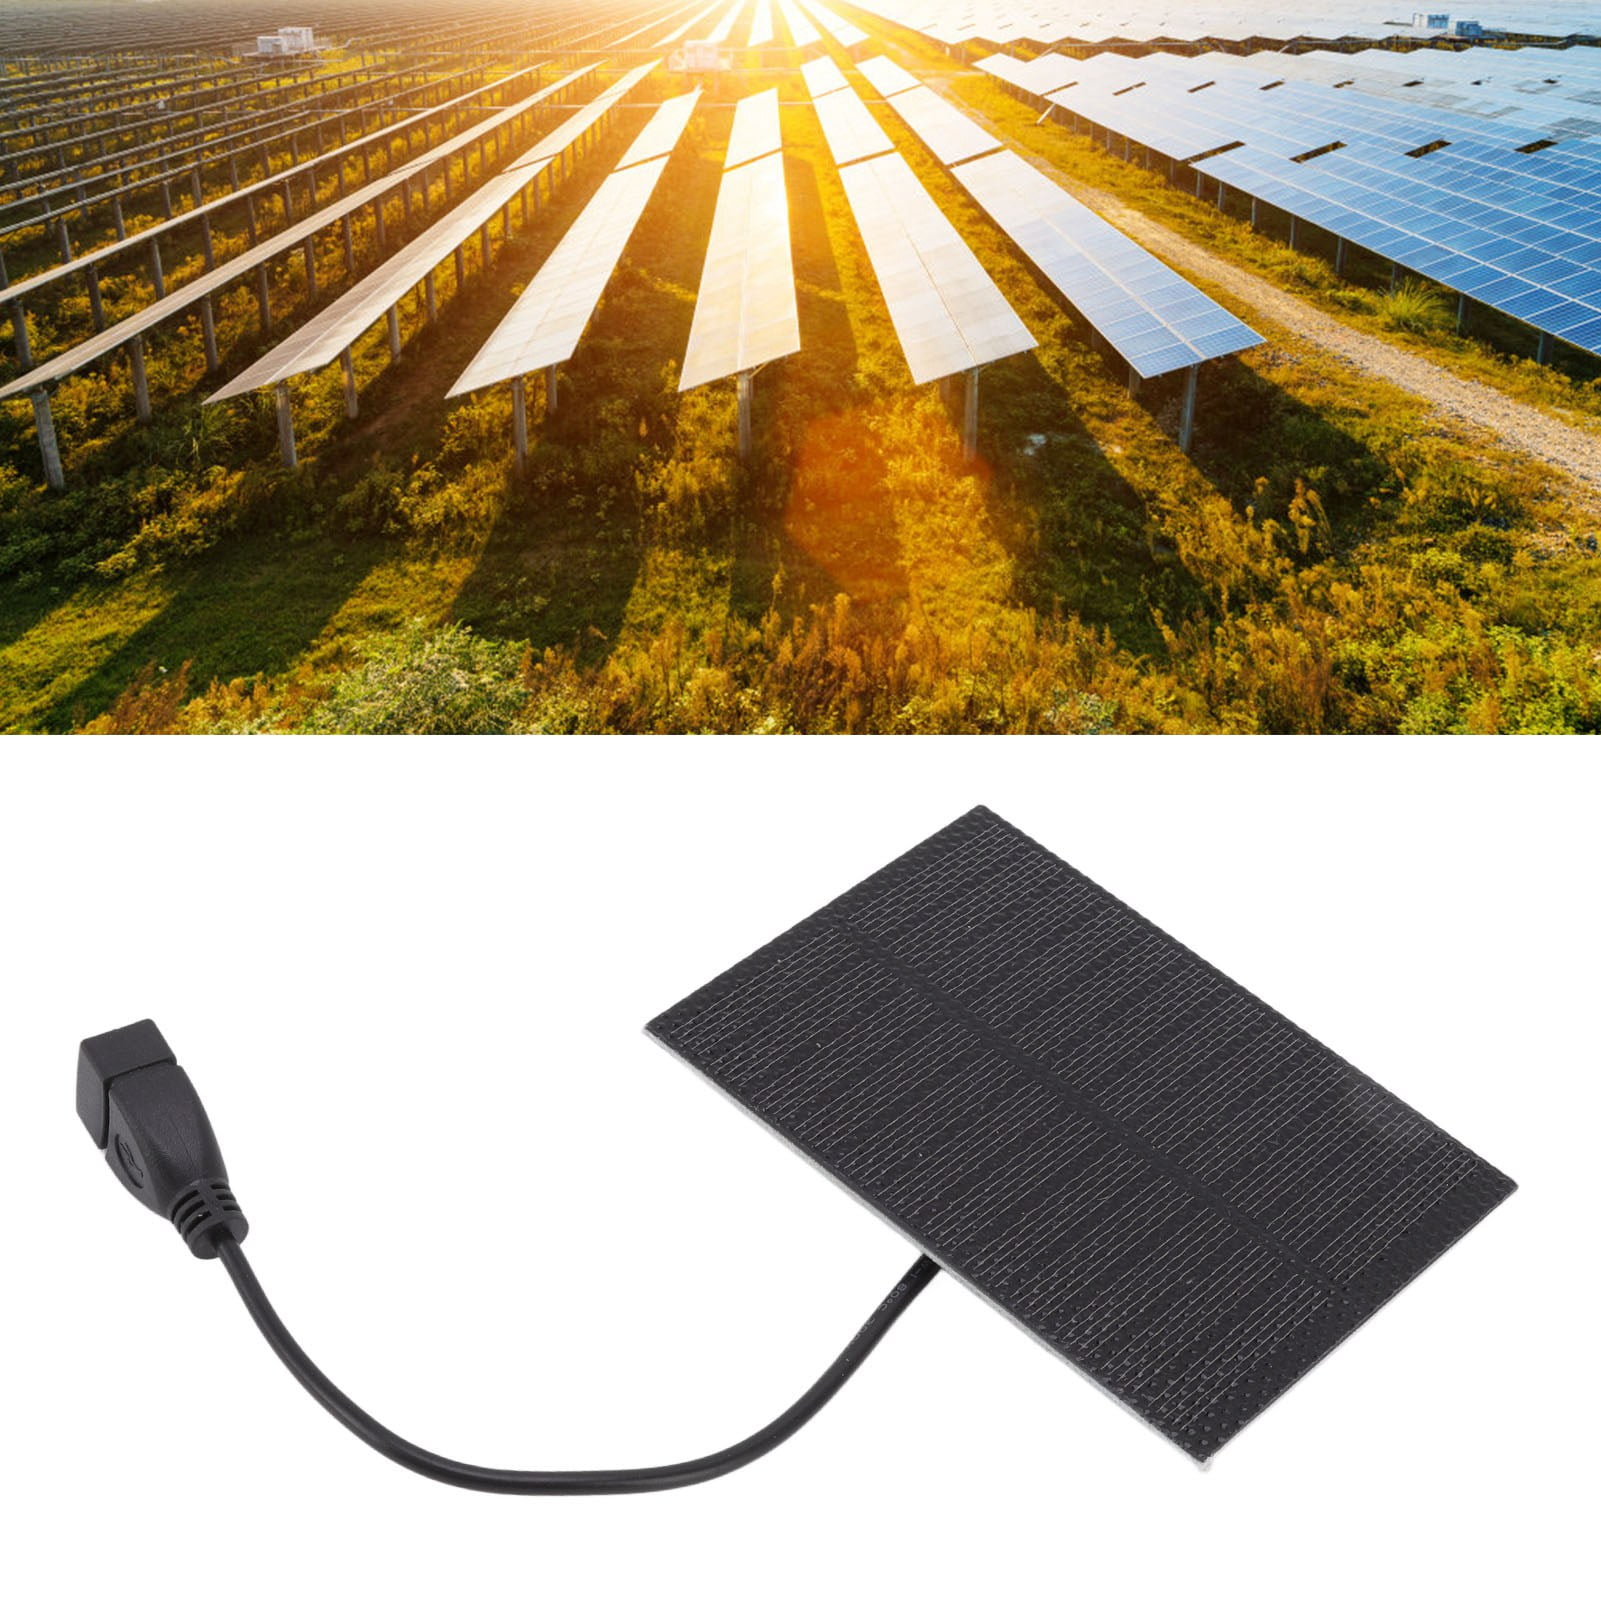 Mp3 Mp4 11 X 8cm / 4.3 X 3.1in 5W 5V Small Size Light Weight Solar Panel Kit with Usb Plug for Mobile Phones Outdoor Portable Solar Panel 